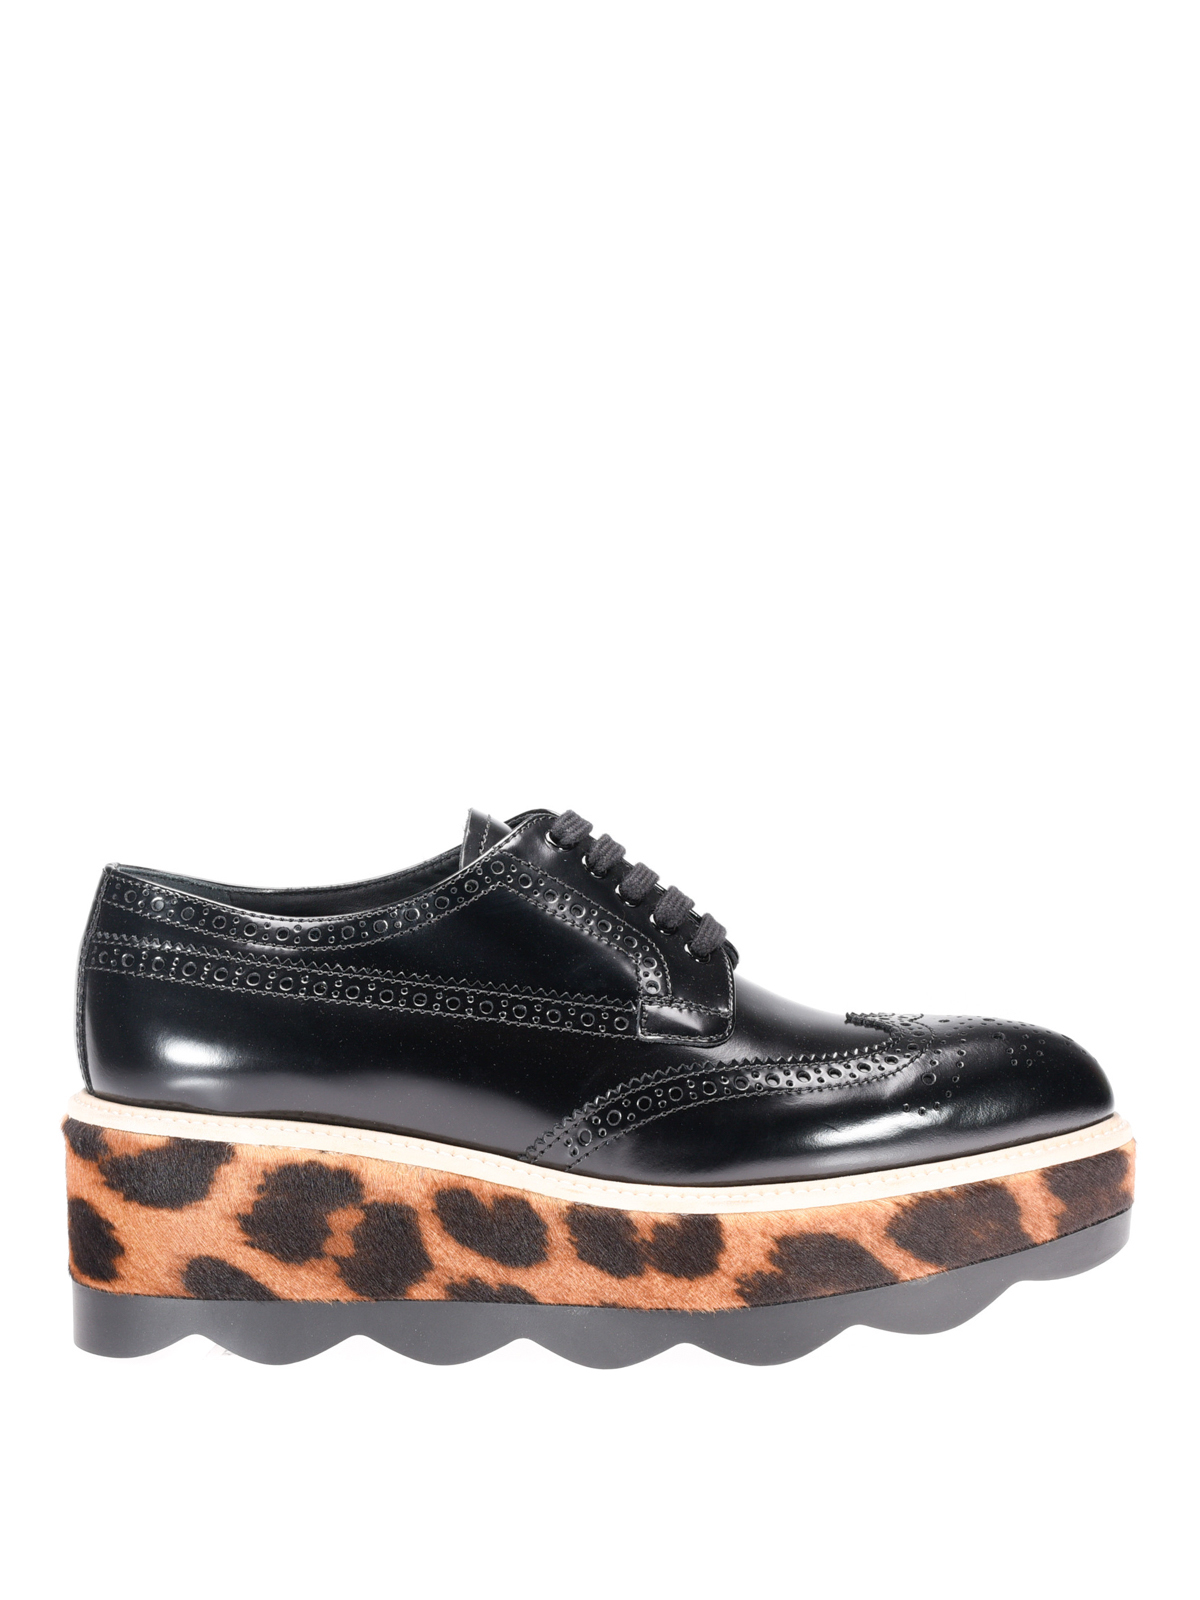 Lace-ups shoes Prada - Haircalf sole leather Derby shoes 